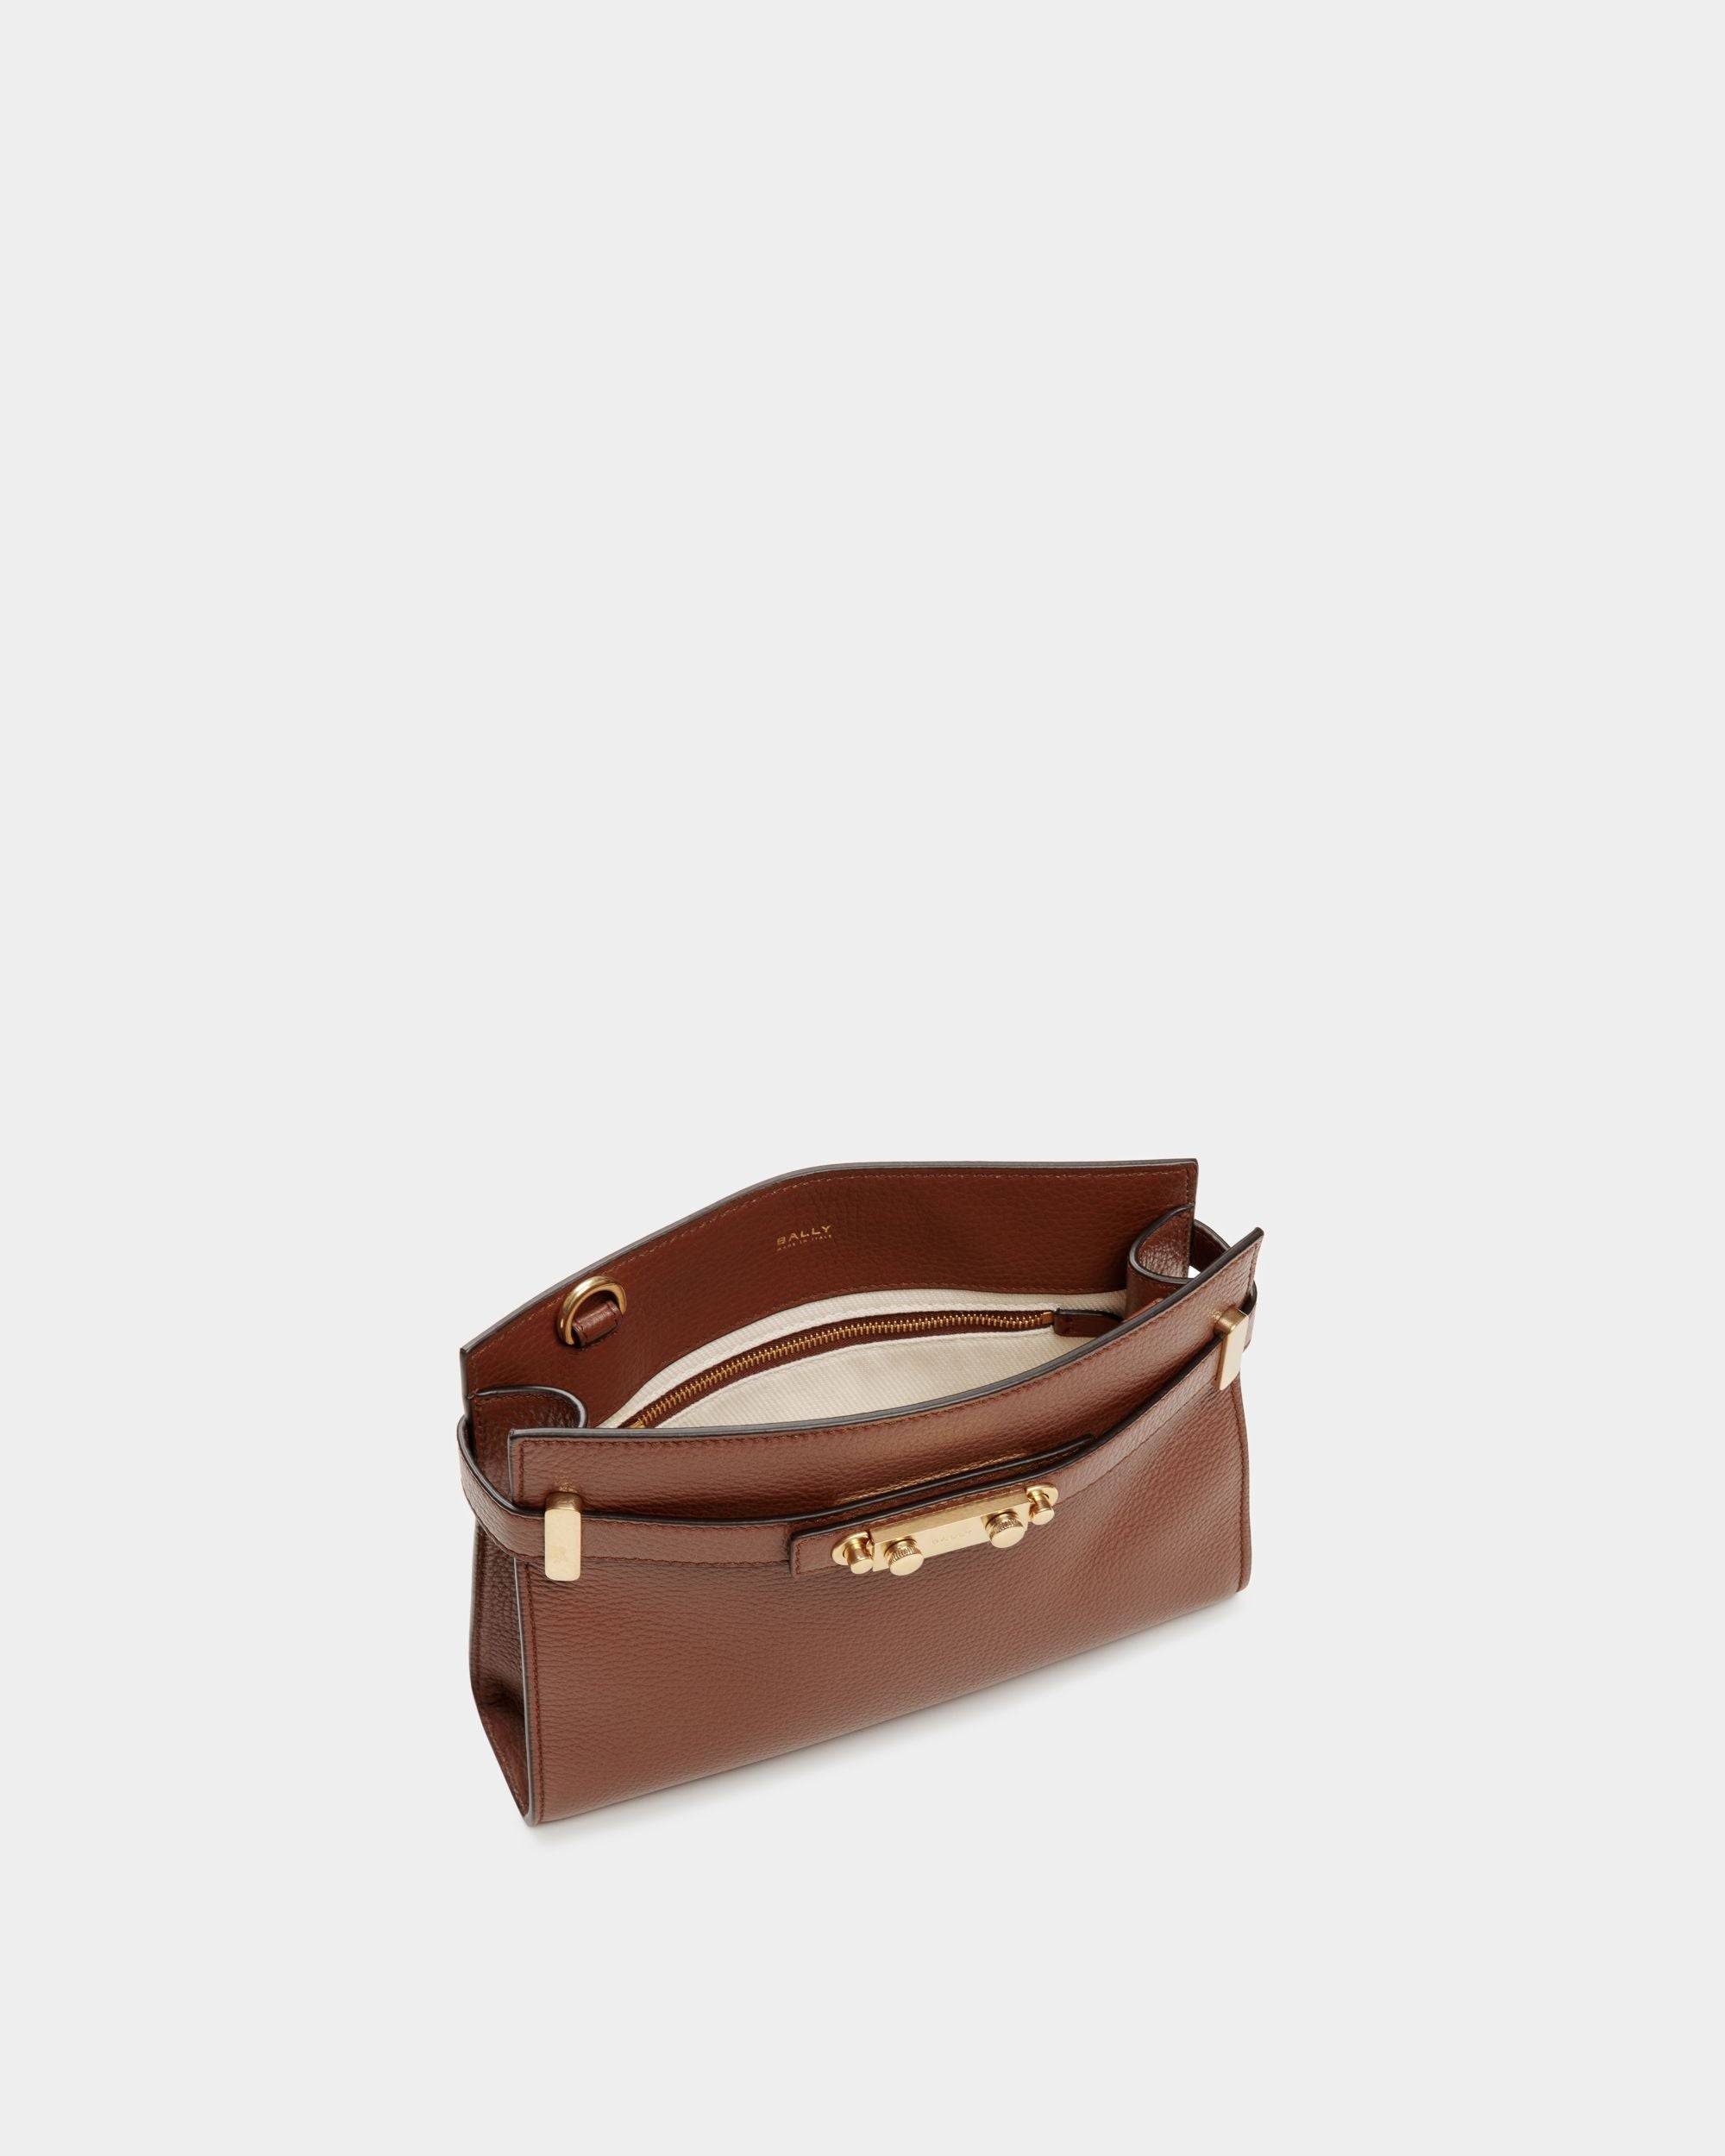 Carriage | Women's Crossbody Bag in Brown Grained Leather | Bally | Still Life Open / Inside